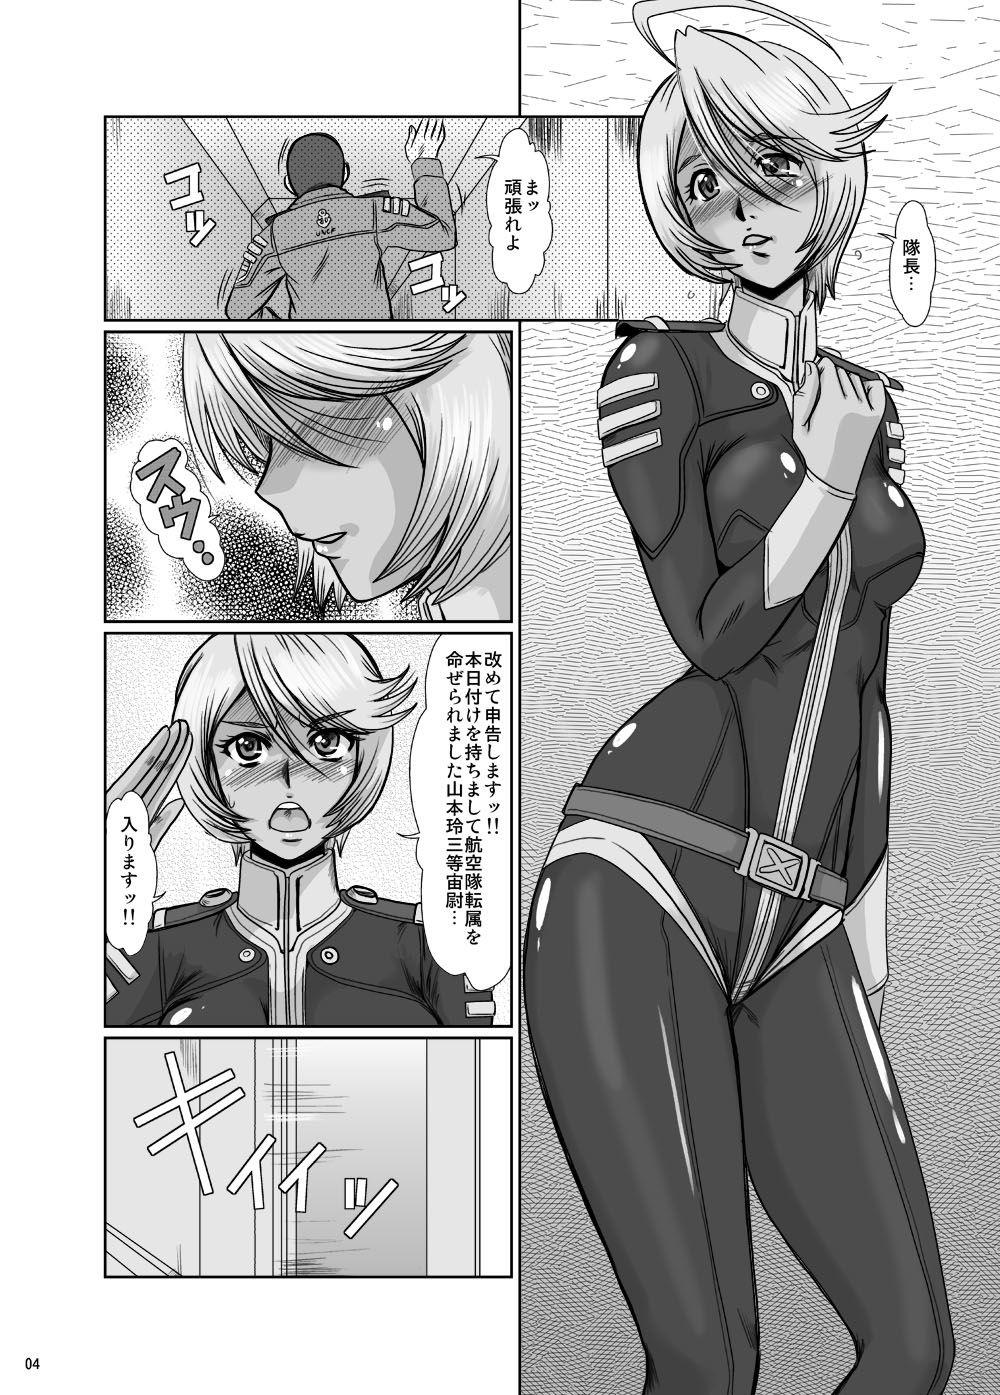 Young Men F-79 - Space battleship yamato 2199 Girl - Page 4